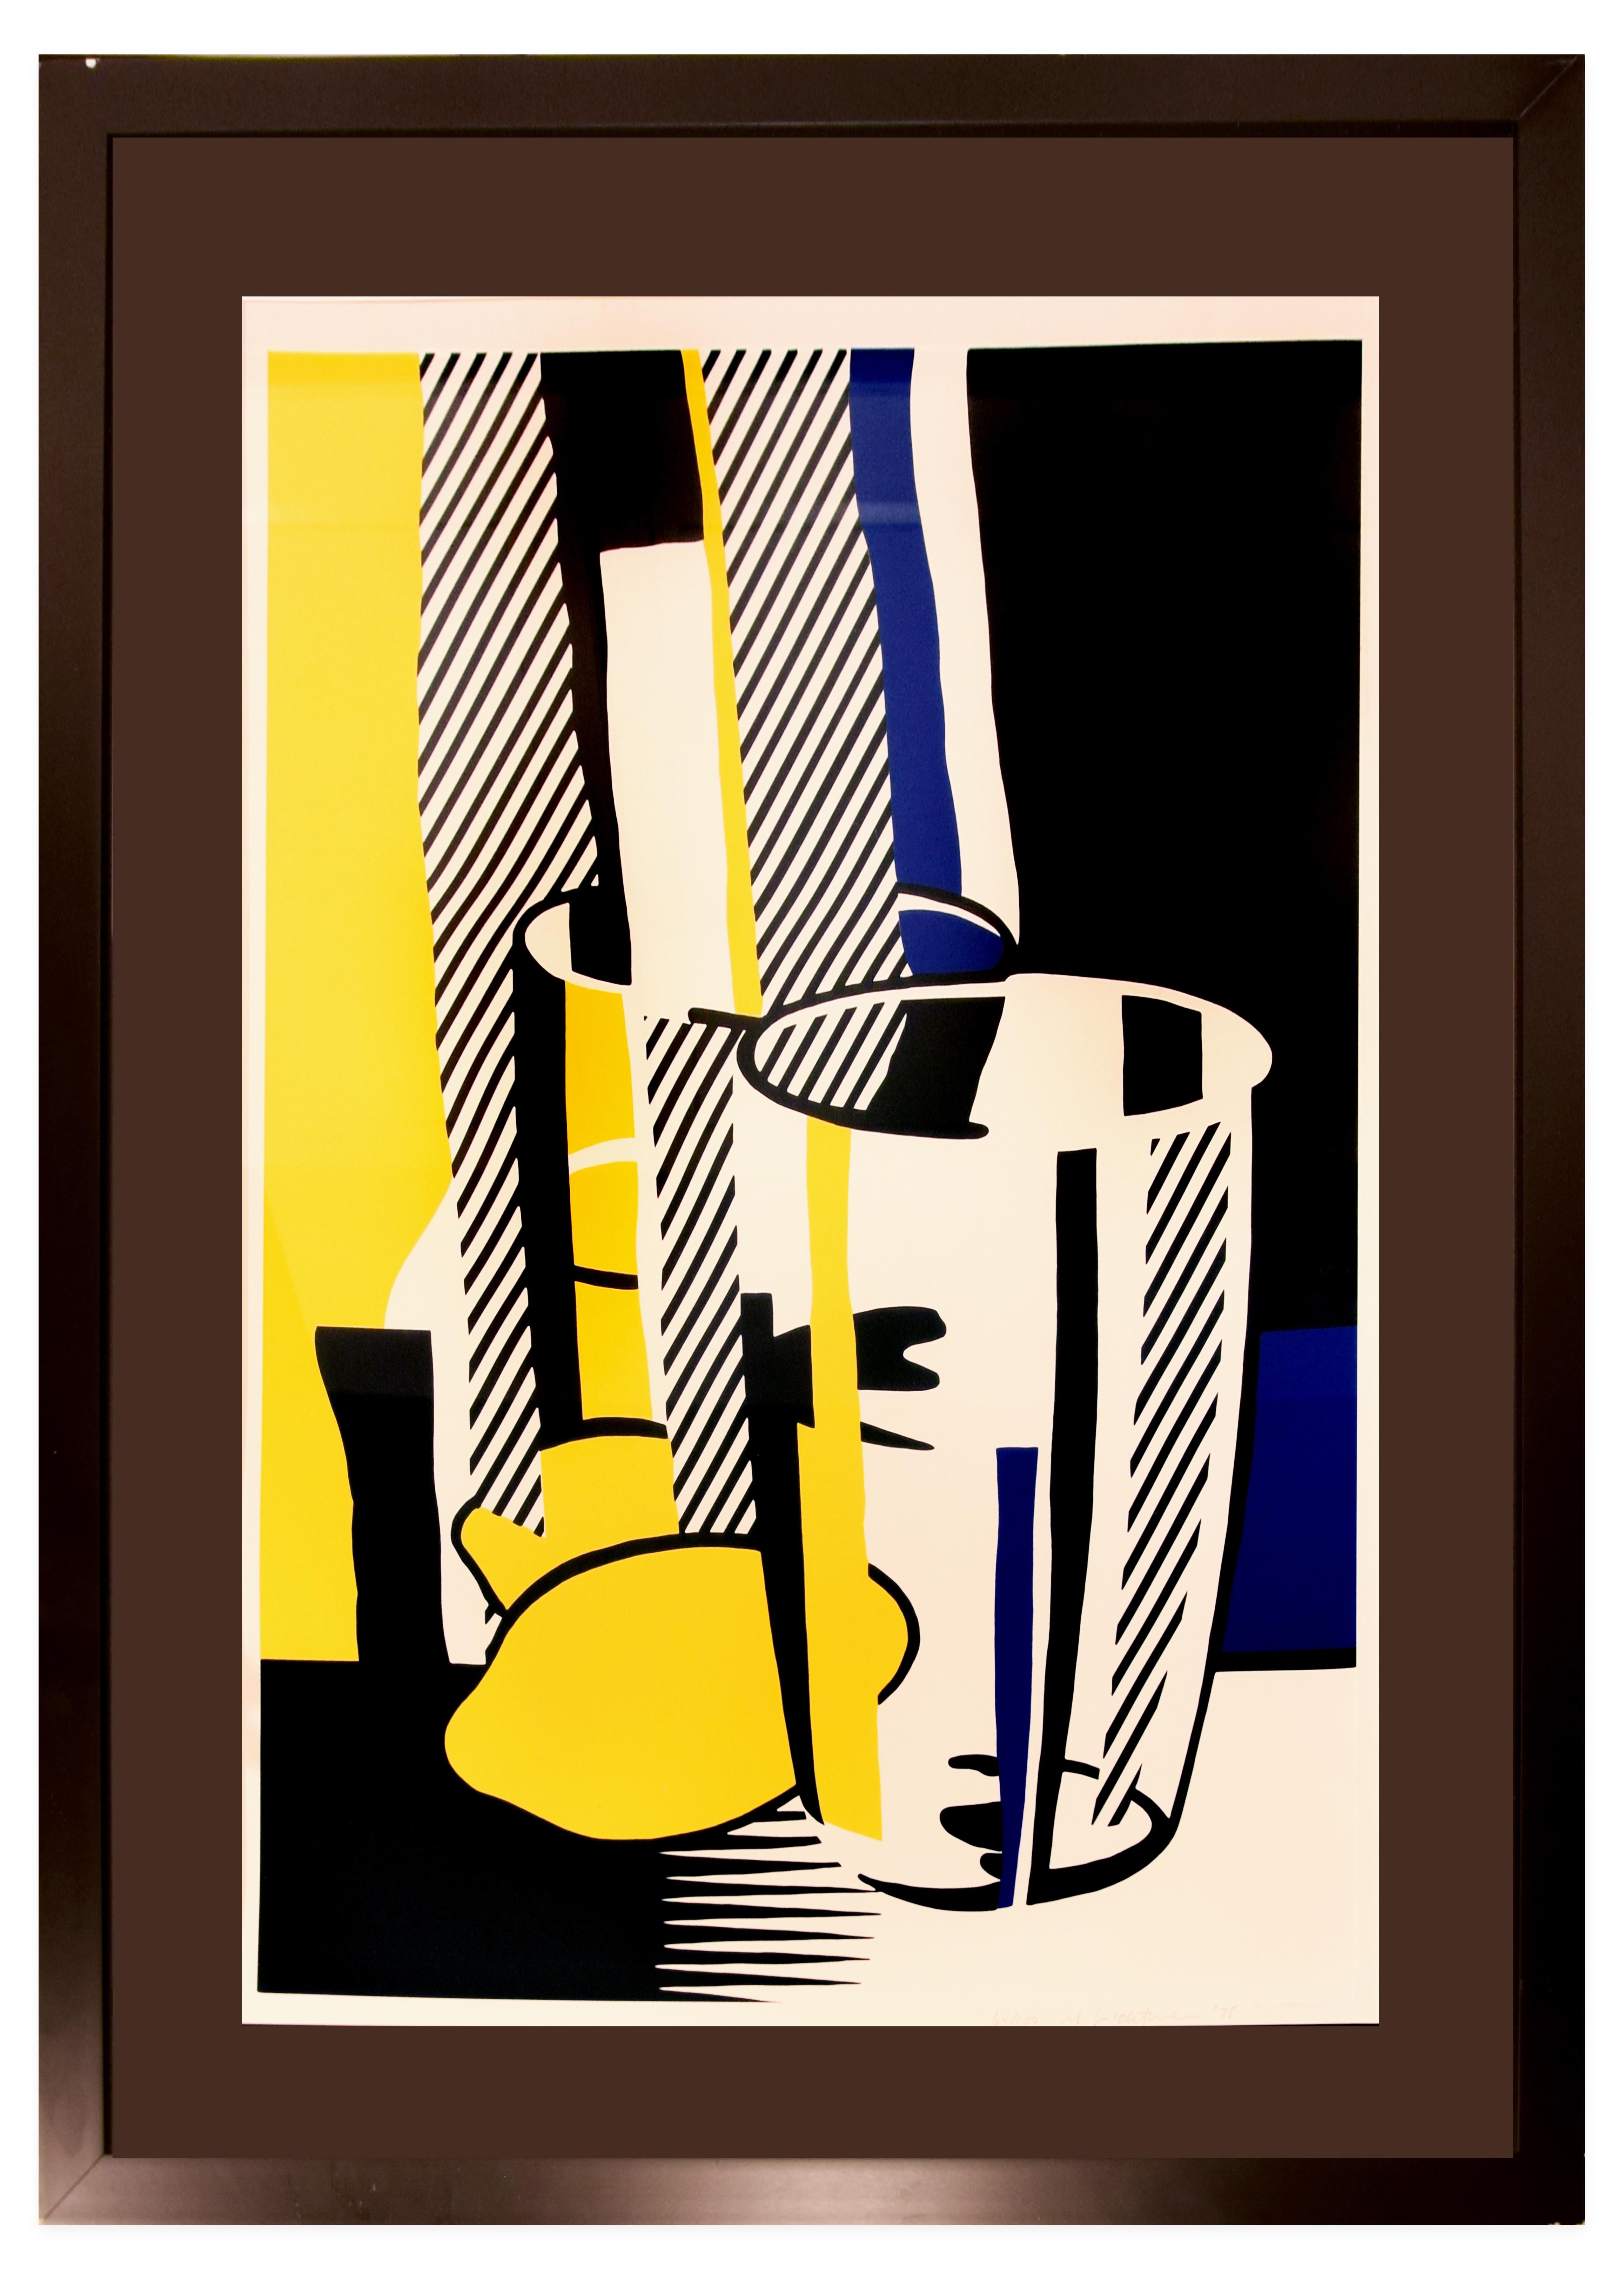 Before The Mirror is a very colorful artwork realized by Roy Lichtenstein in 1975.

Mixed colored lithograph on paper - framed.

This beautiful print is from the portfolio Mirrors of the Mind of ten prints and one multiple, on BFK Rives paper,